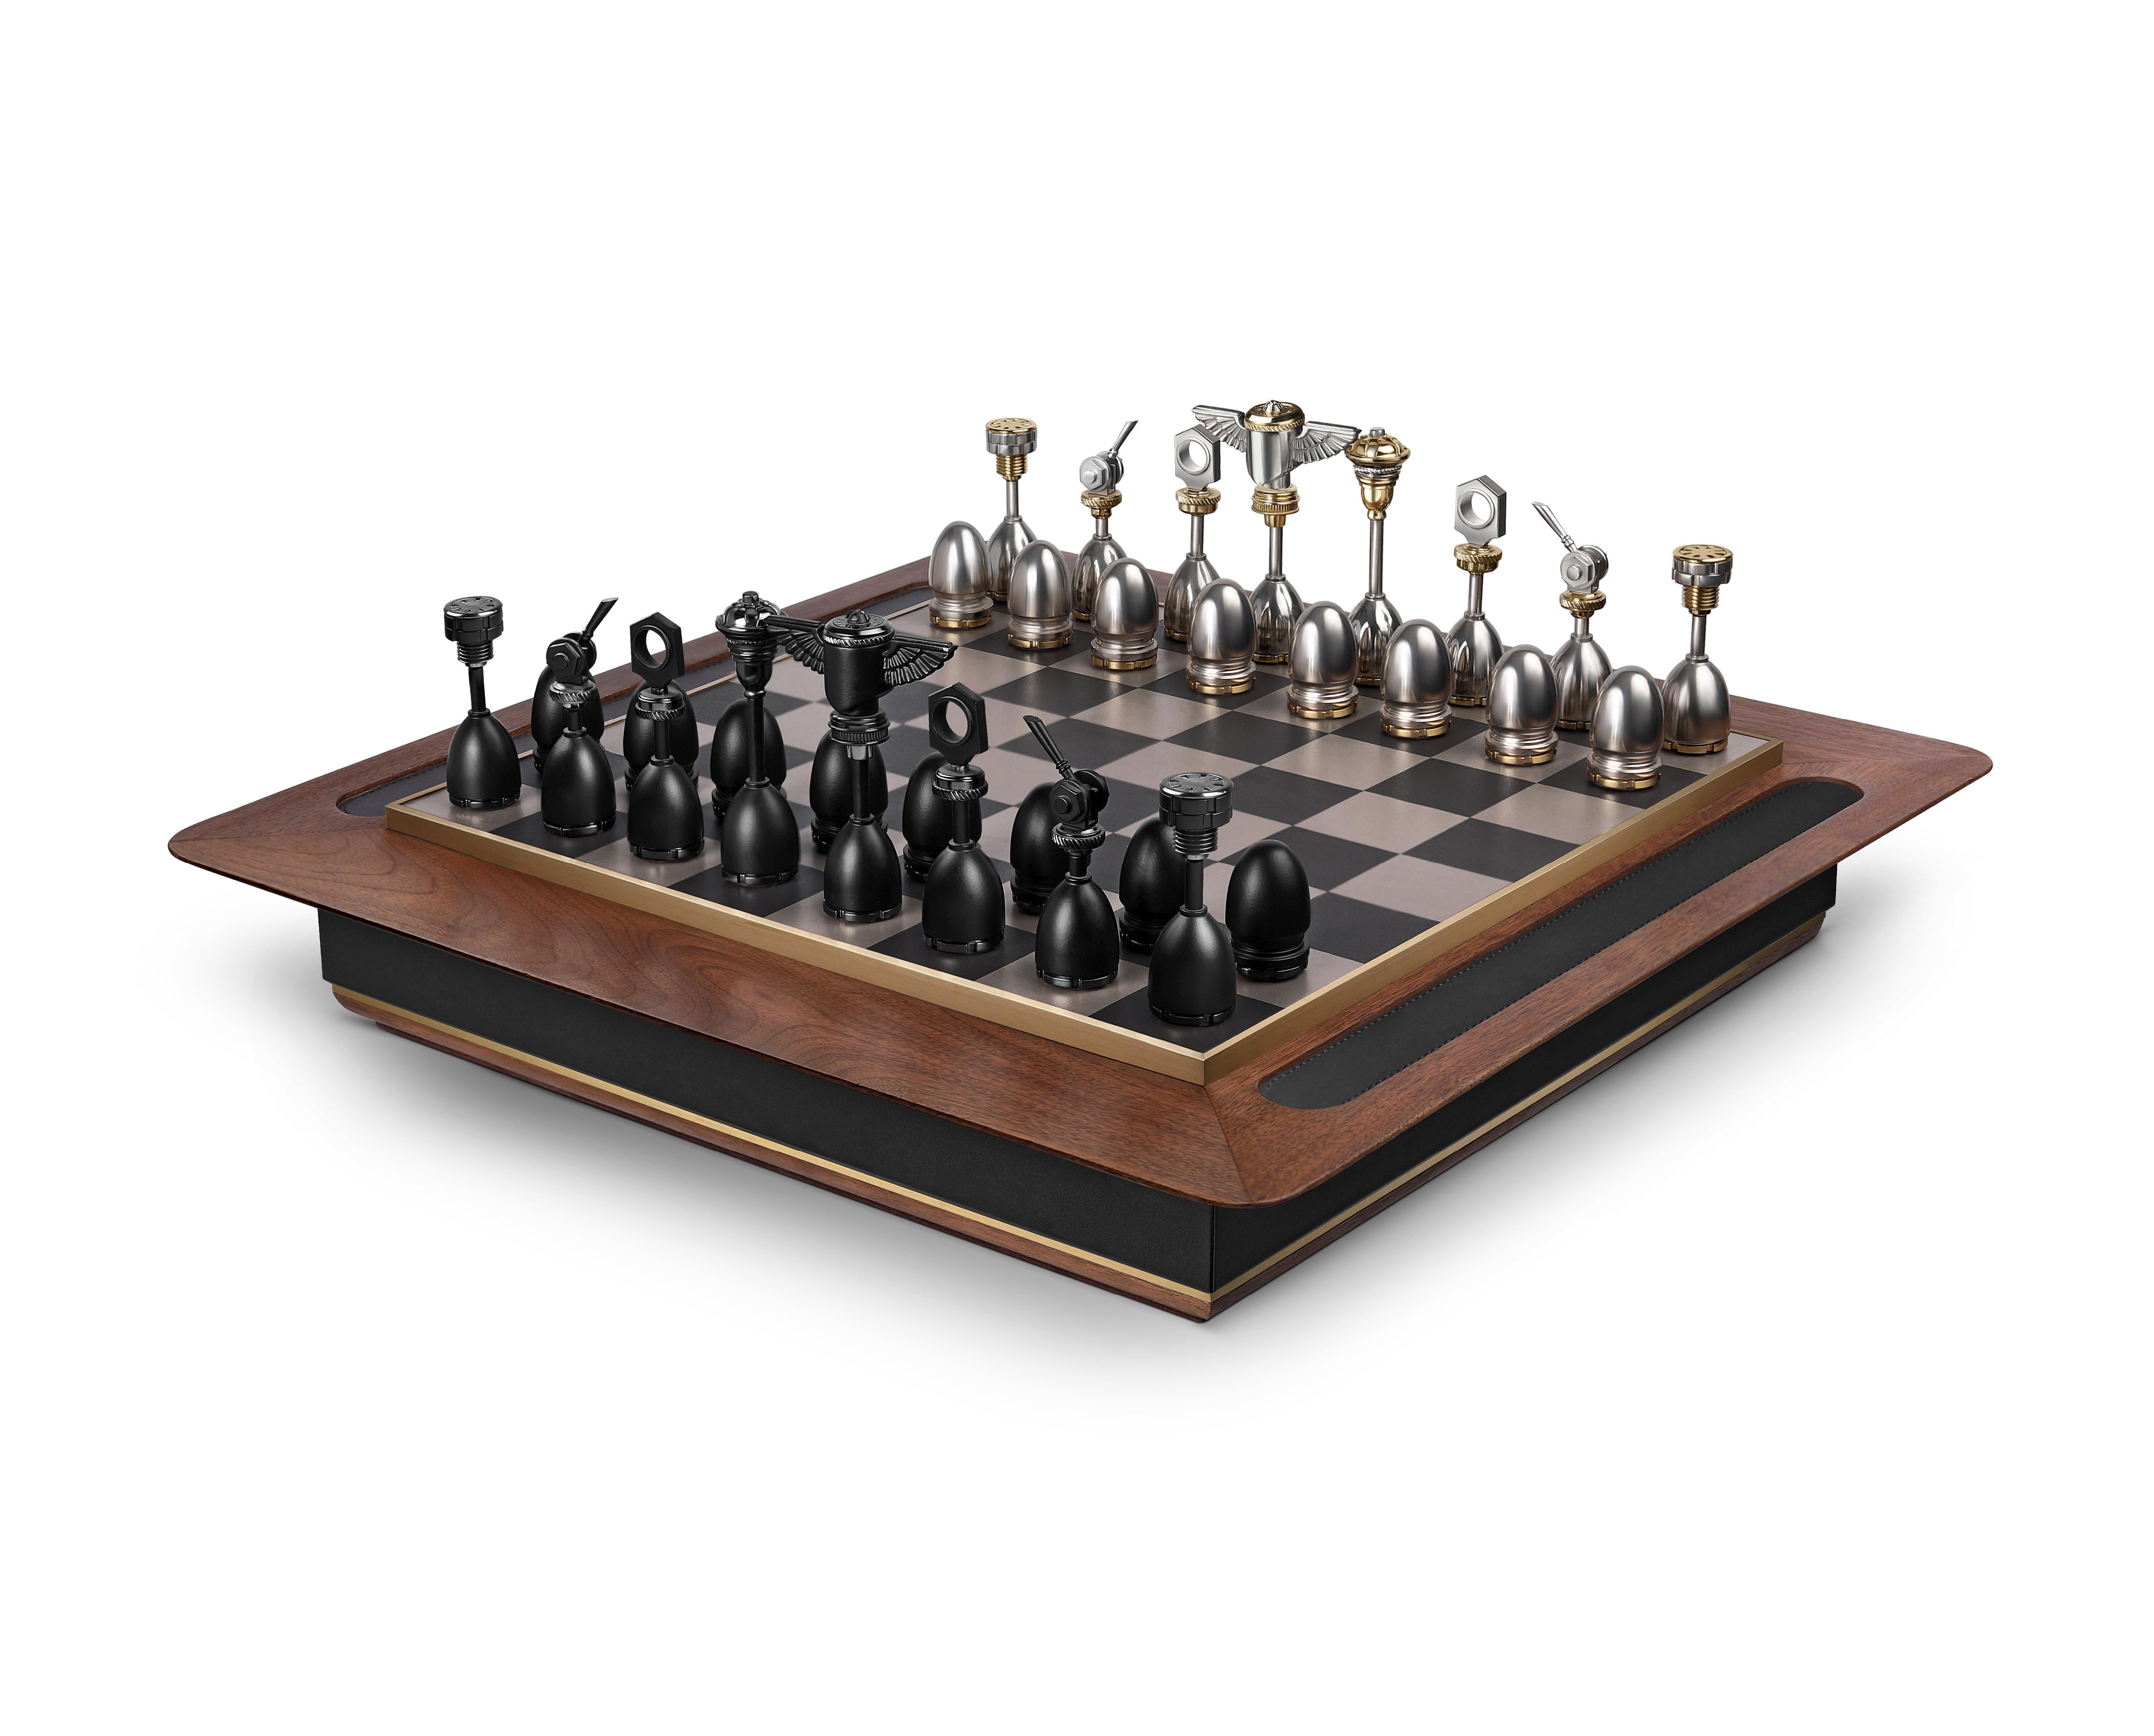 3L Shatranj chess set by Madheke
Dimensions: W 54.8 D 54.8 H 9.5 cm
Materials: Leather, Metal, Wood

Inspired by the Bentley 3-Litre, the 3L Shatranj pays homage to the engineering brilliance and innovation of W.O Bentley and his team.

A